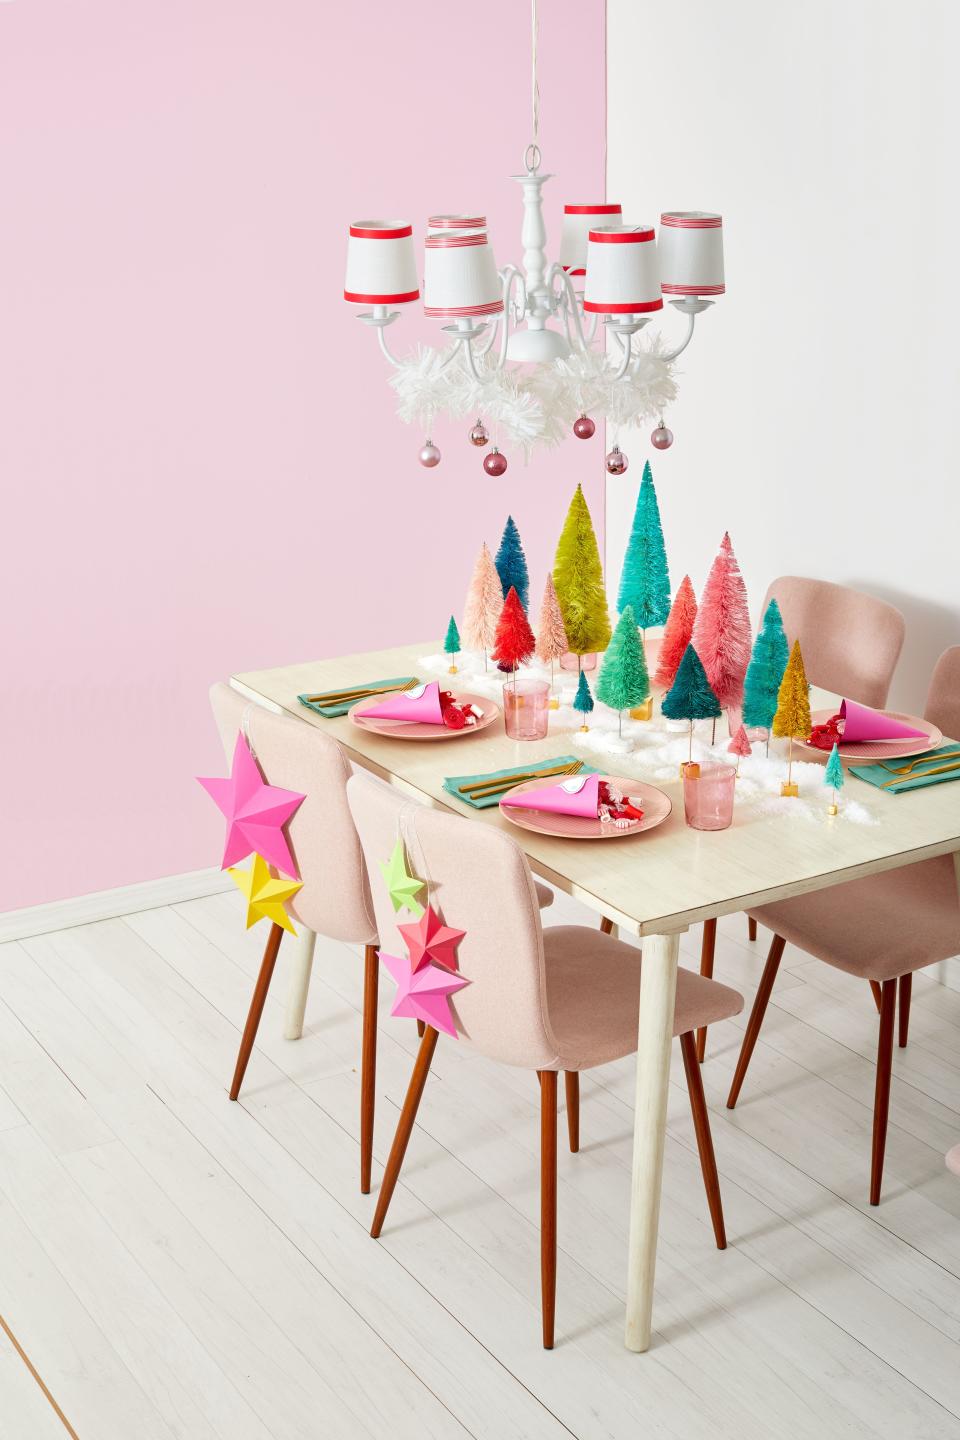 These Festive DIY Christmas Table Decorations Will Brighten Up Your Holiday Table